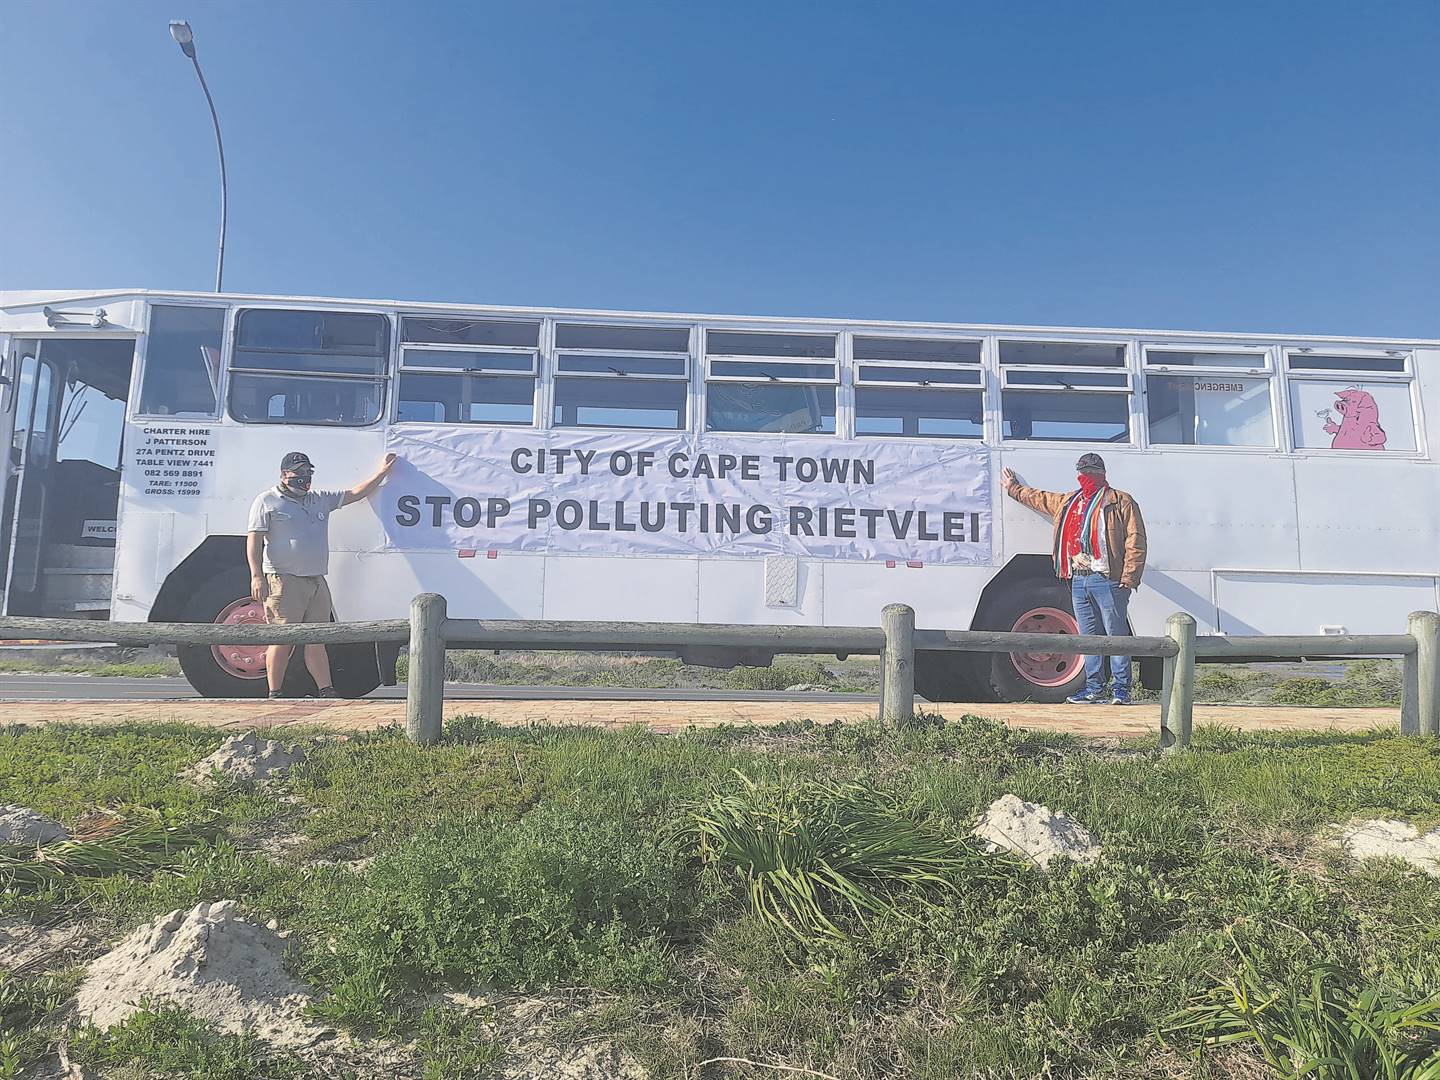 Community activists came together in 2021 to protest against the ongoing pollution at Rietvlei.PHOTO: Kailin Daniels